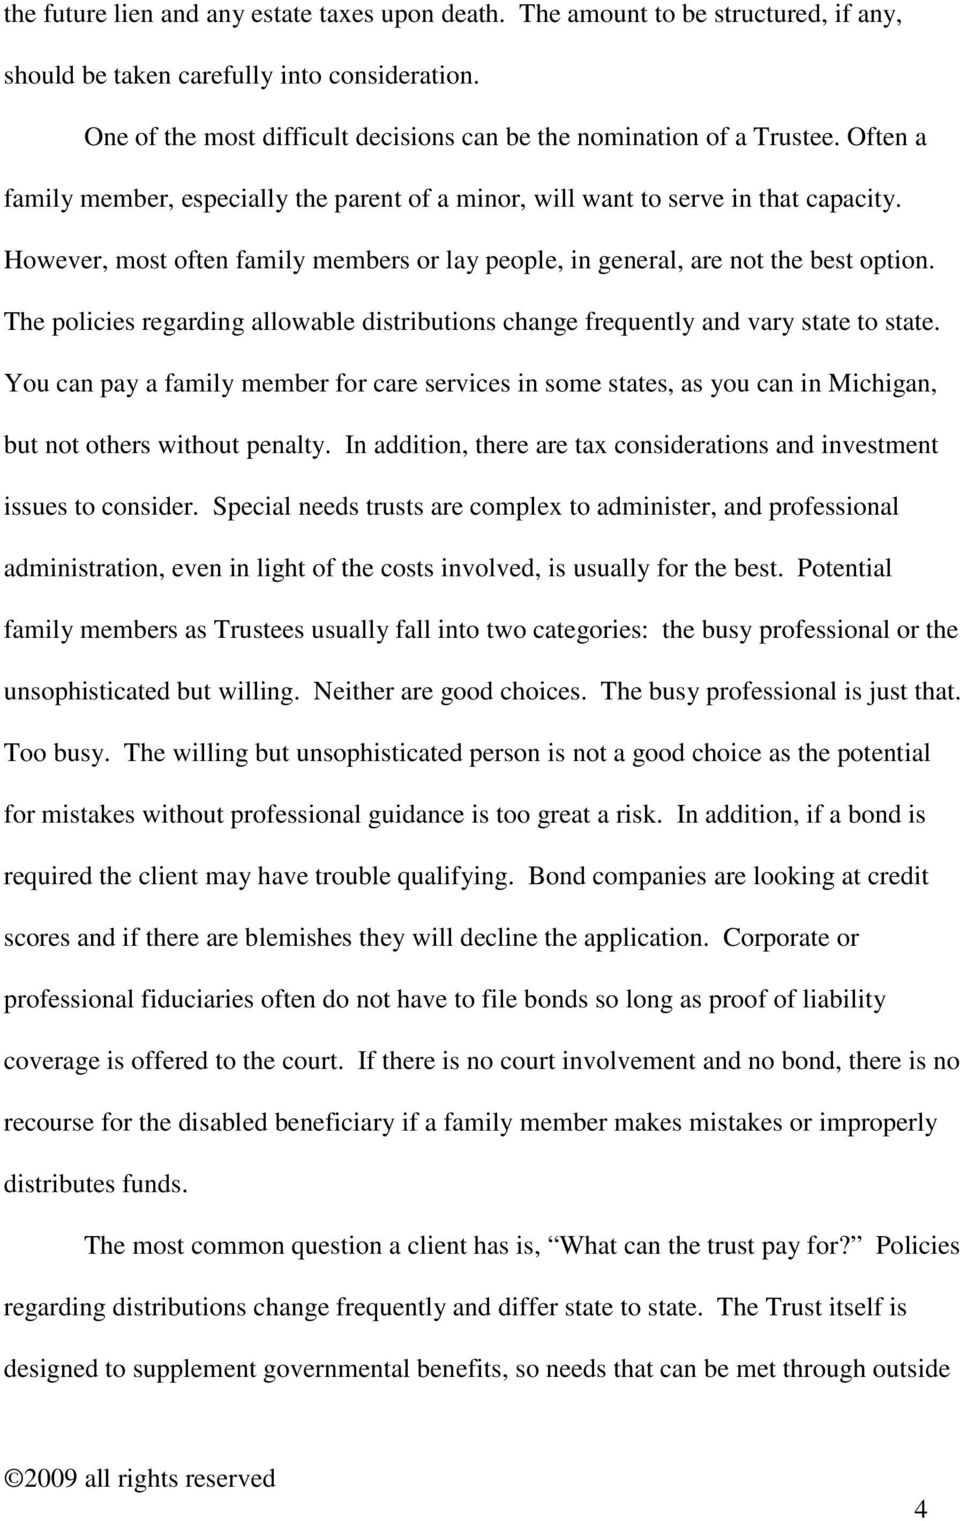 However, most often family members or lay people, in general, are not the best option. The policies regarding allowable distributions change frequently and vary state to state.